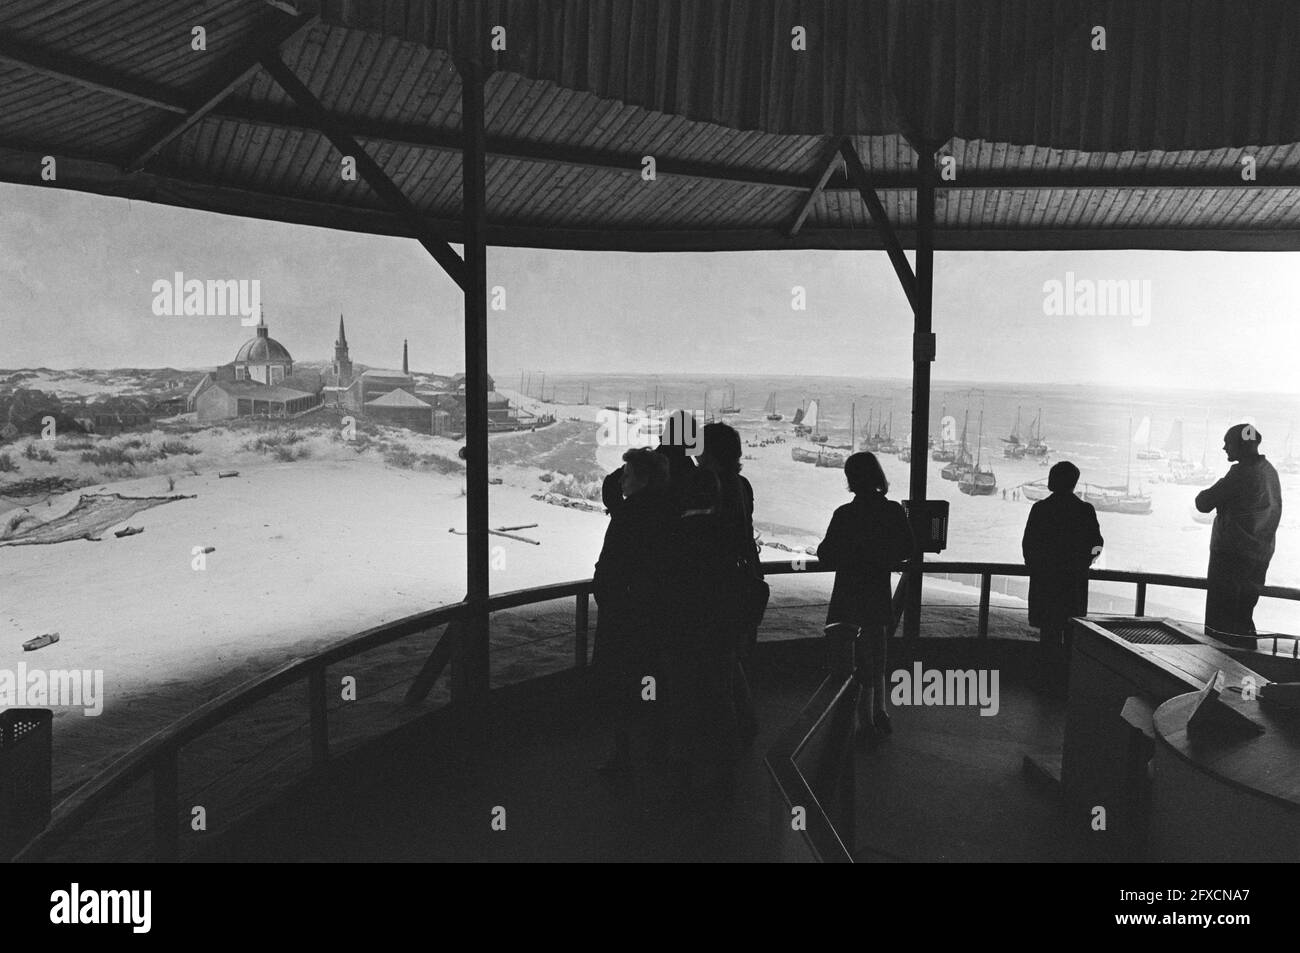 Panorama Mesdag in The Hague, April 2, 1976, The Netherlands, 20th century press agency photo, news to remember, documentary, historic photography 1945-1990, visual stories, human history of the Twentieth Century, capturing moments in time Stock Photo